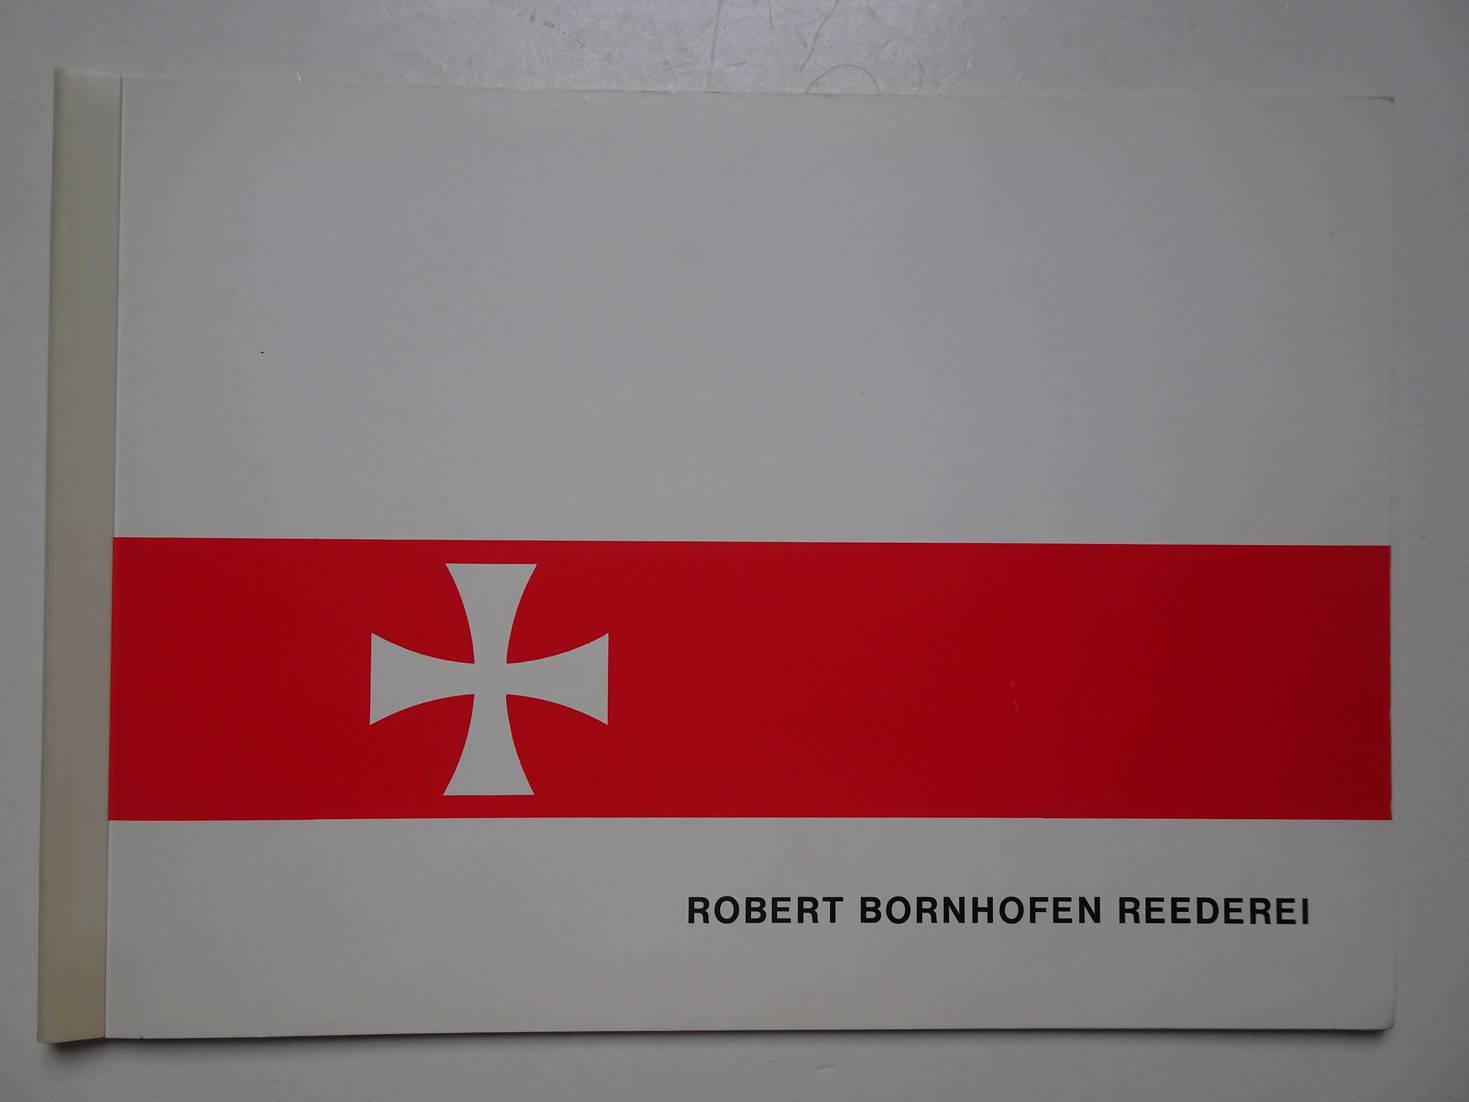 N.n.. - Robert Bornhofen Reederei. Shipowners, shipbrokers and chartering agents sale and purchase brokers.